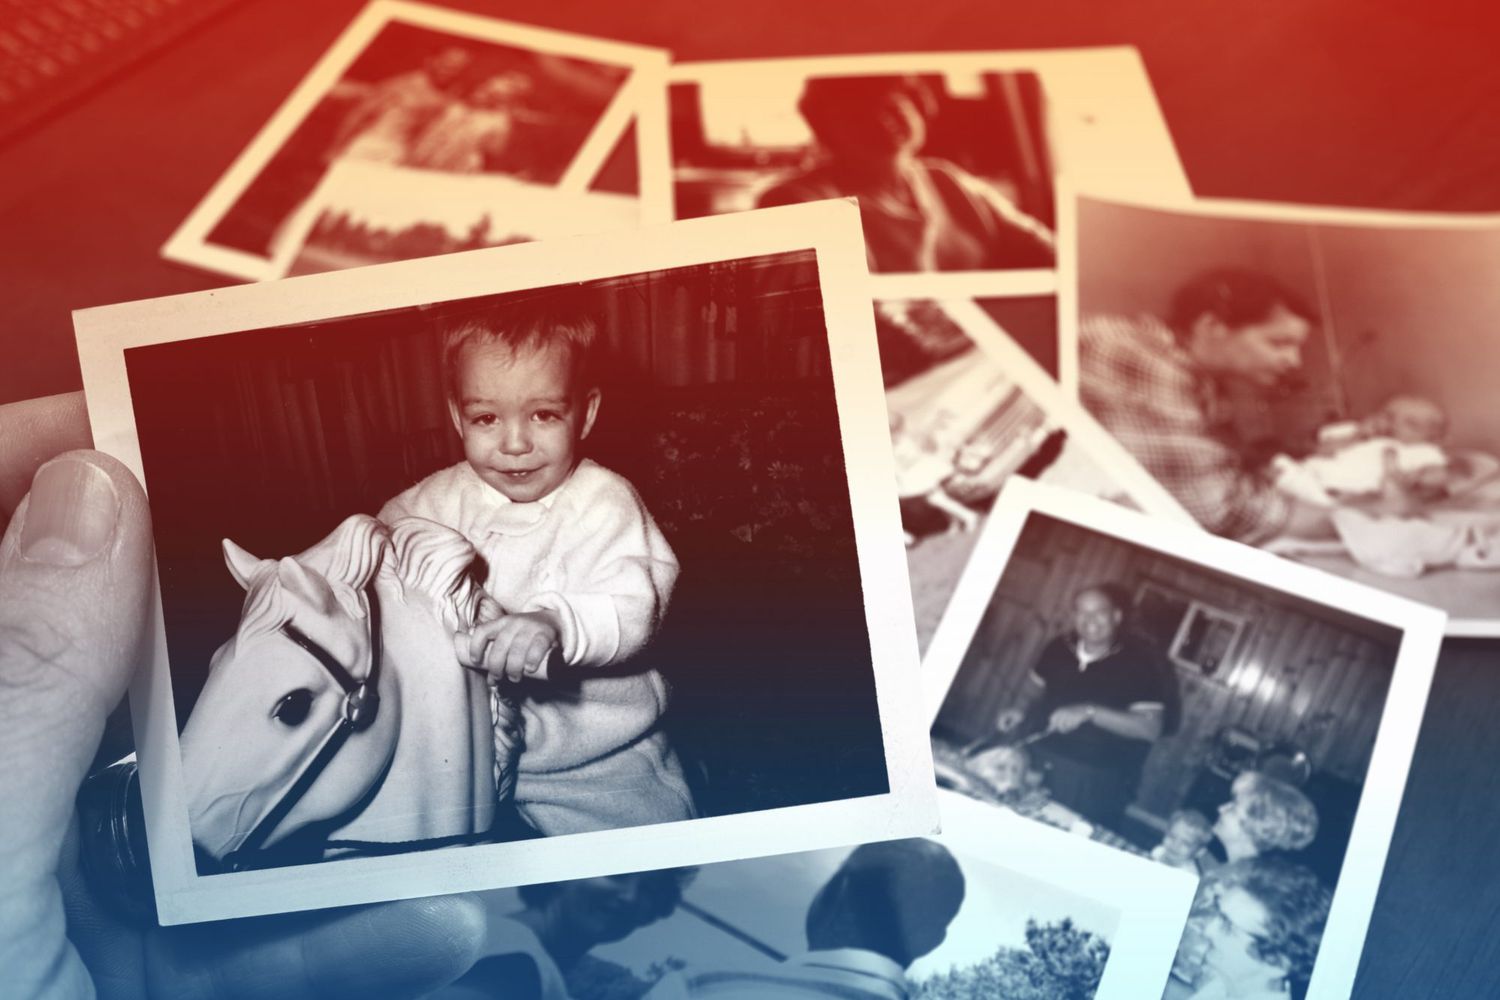 Hand holds Vintage photograph of child on horse toy with pile of old photos in background